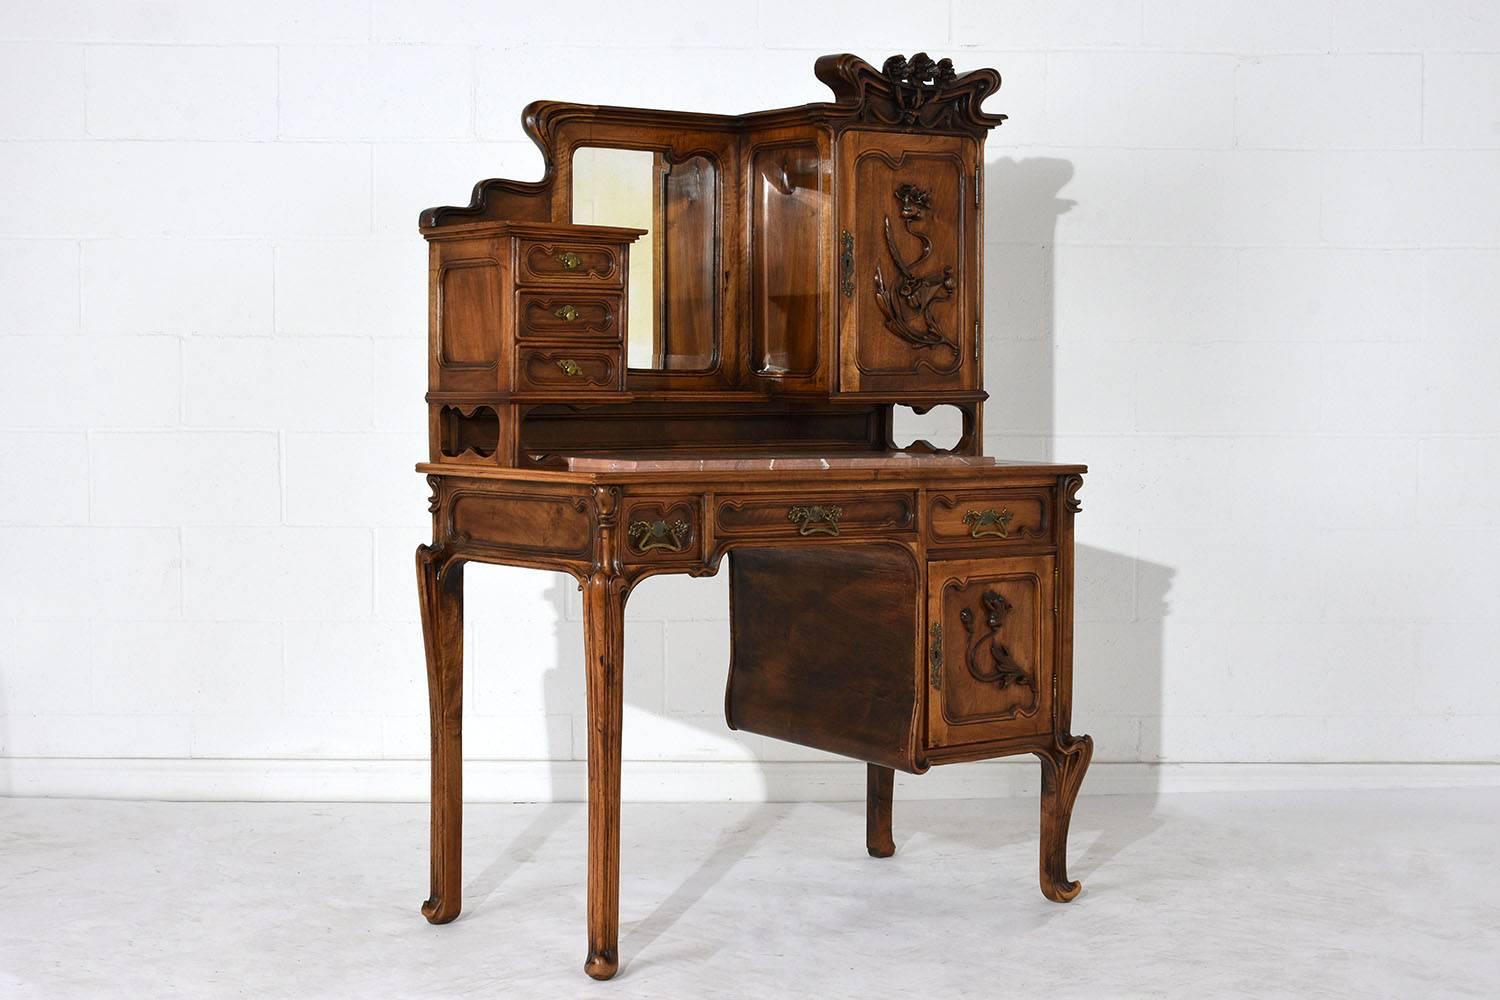 This Exquisite 1900s Art Nouveau Desk is made in the manner of Louis Majorelle and is made of walnut wood in its original walnut color stain and has recently been waxed/polished giving it a lovely patina finish. This desk features the original